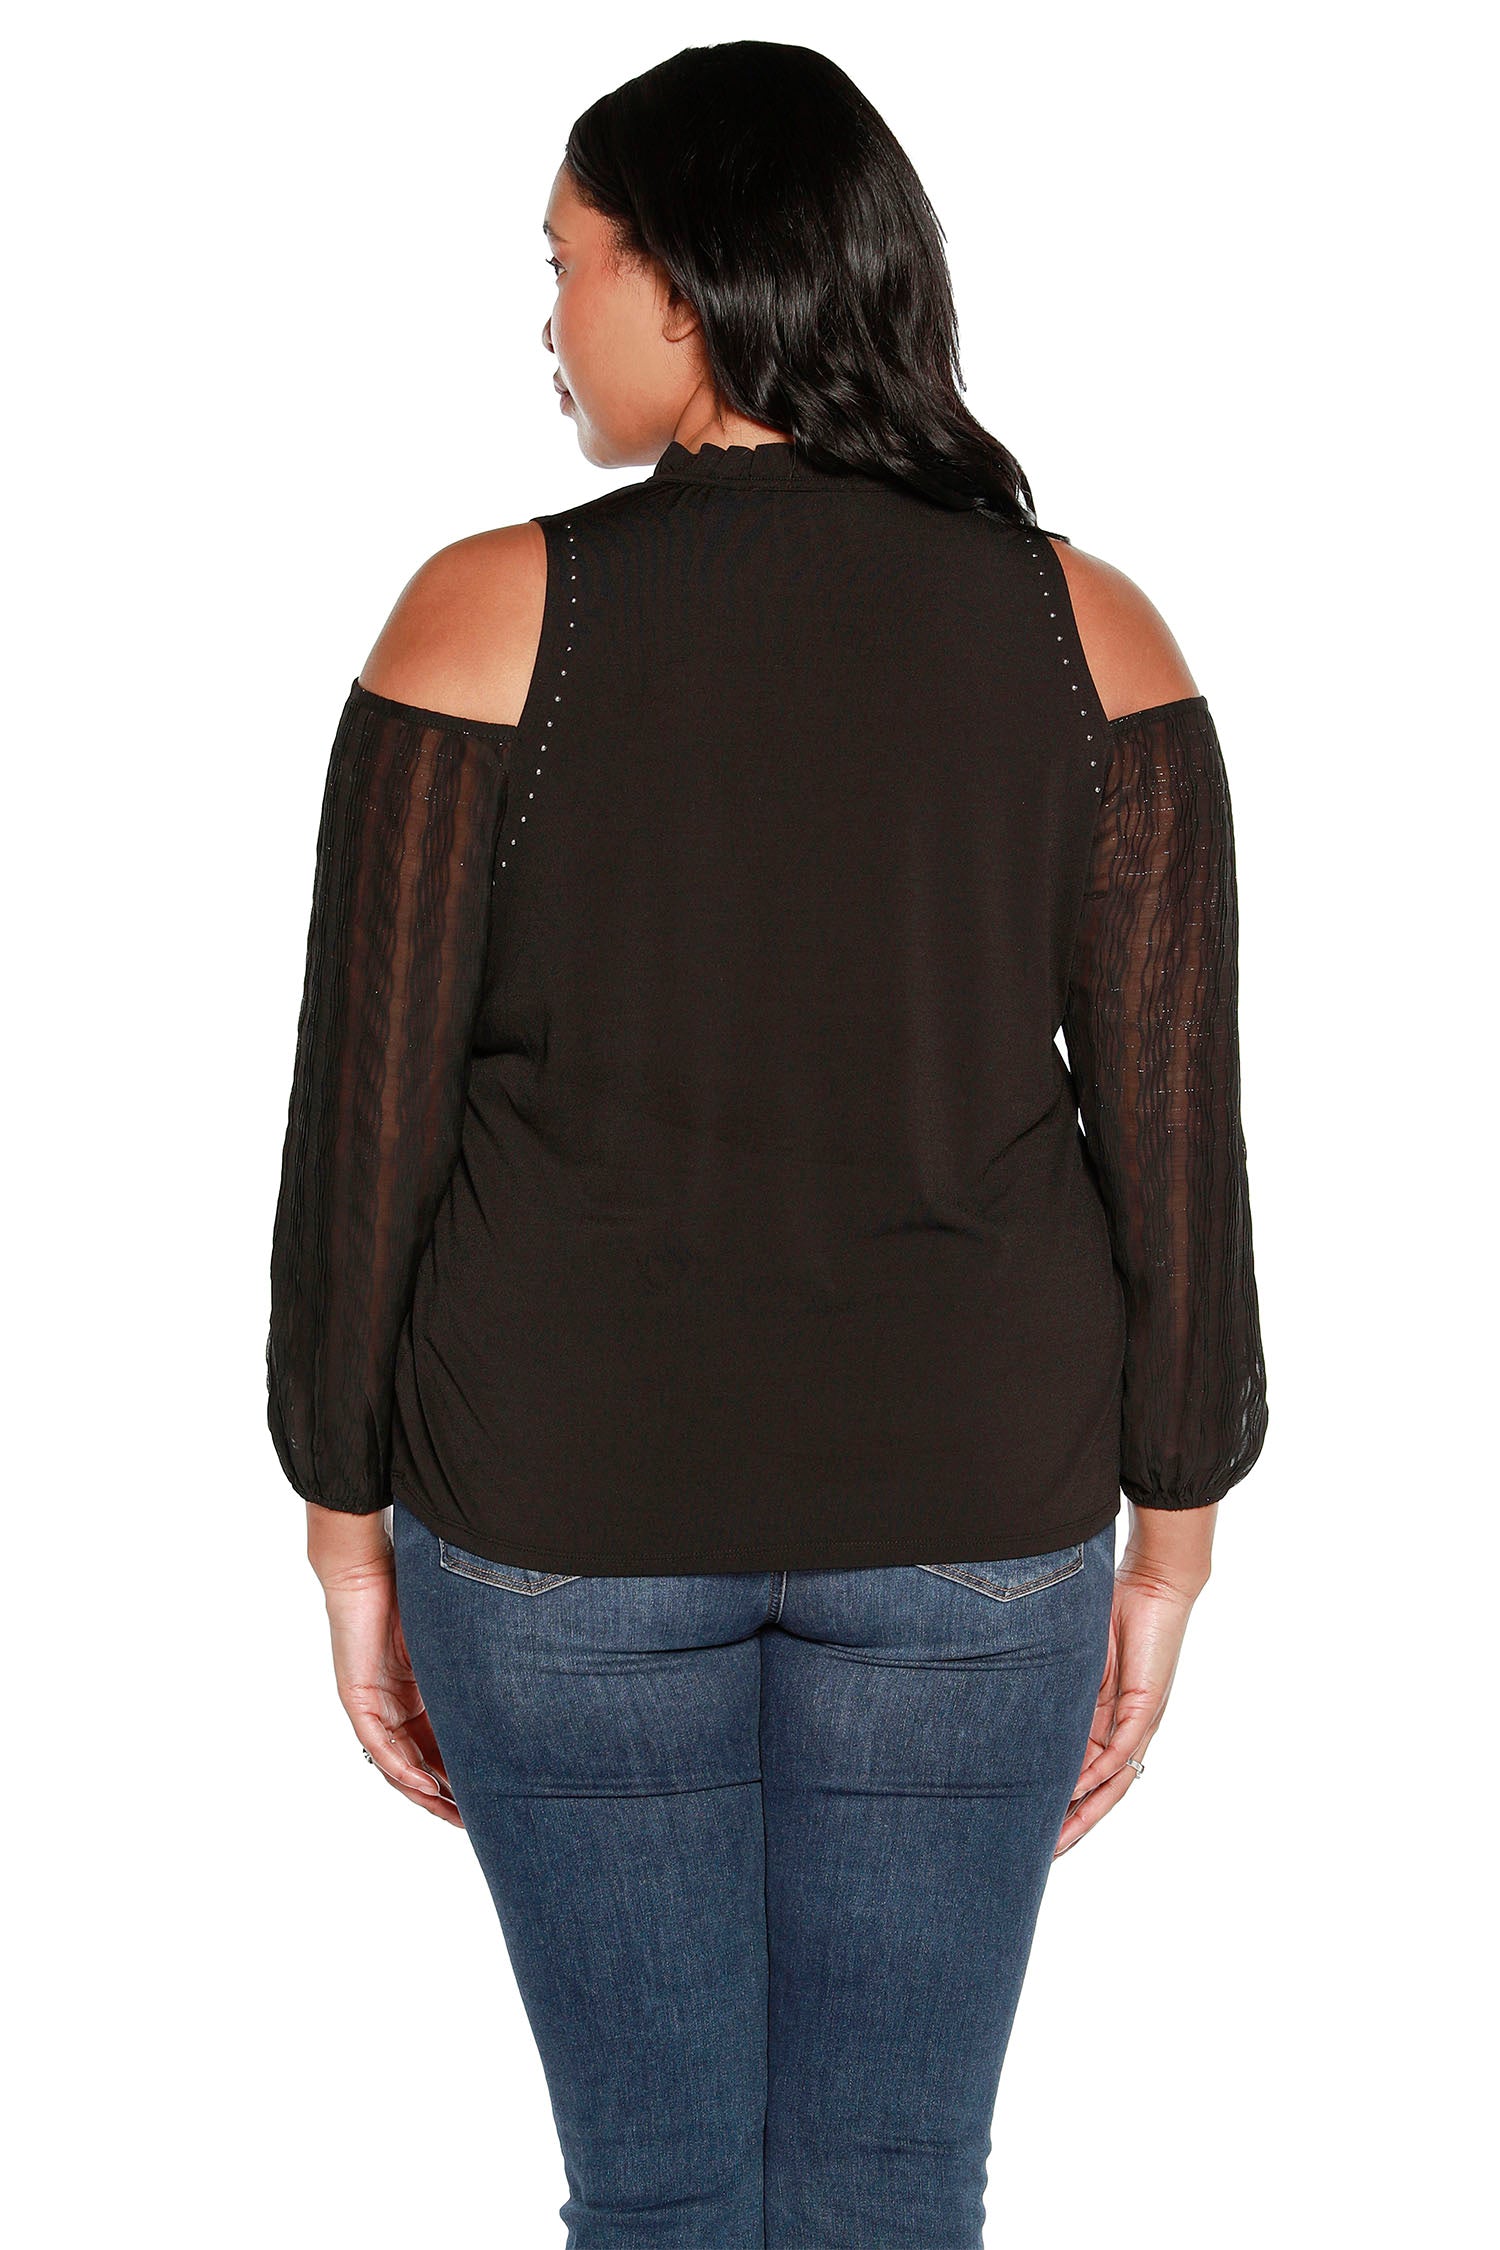 Women's Cold Shoulder Chiffon Sleeve Top with Lurex and Keyhole Neckline | Curvy